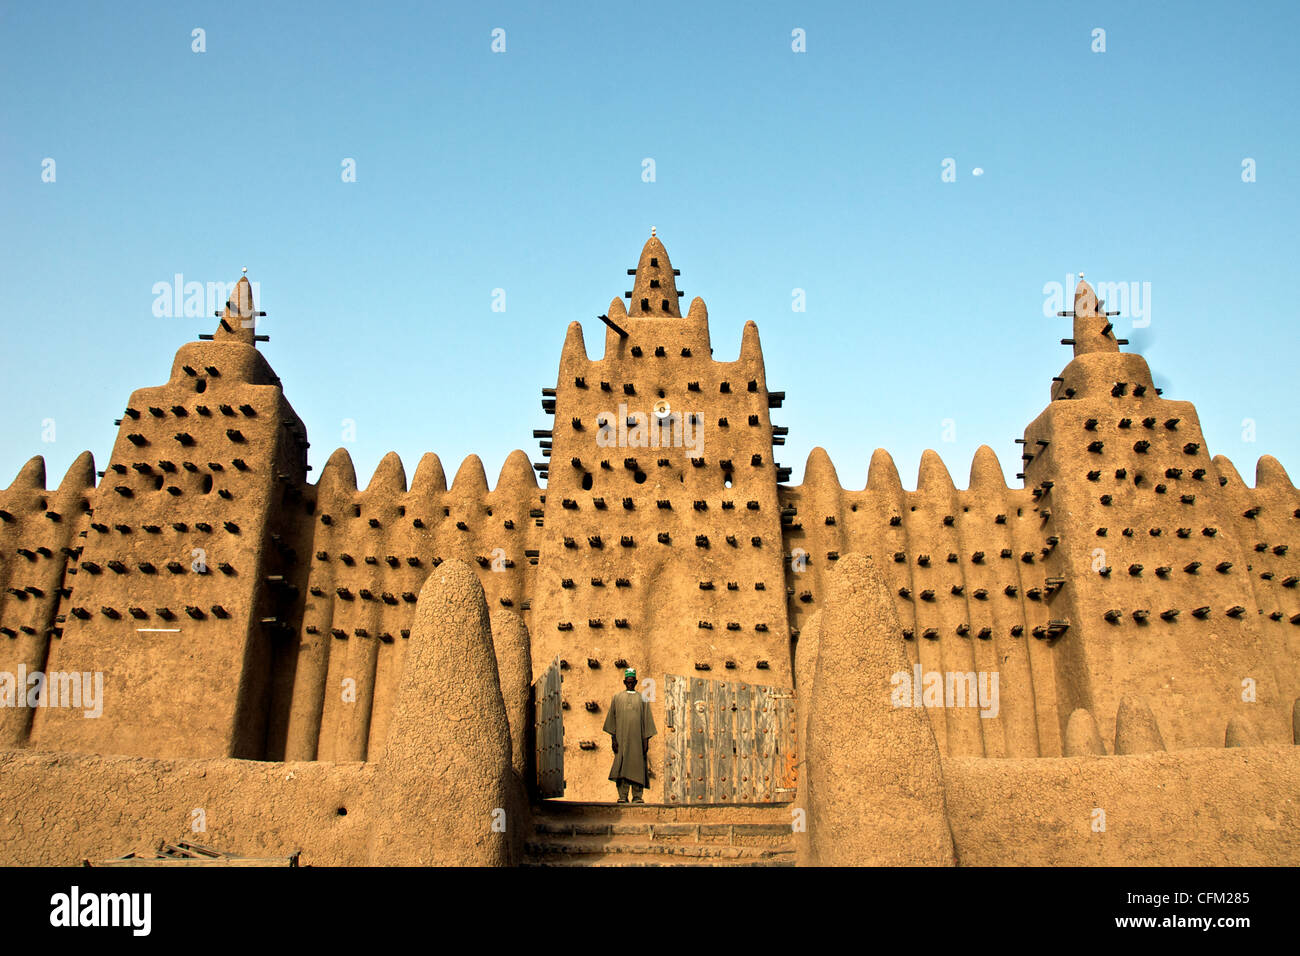 A man stands at the gates of the Great Mosque of Djenne in Djenne, Mali. Stock Photo